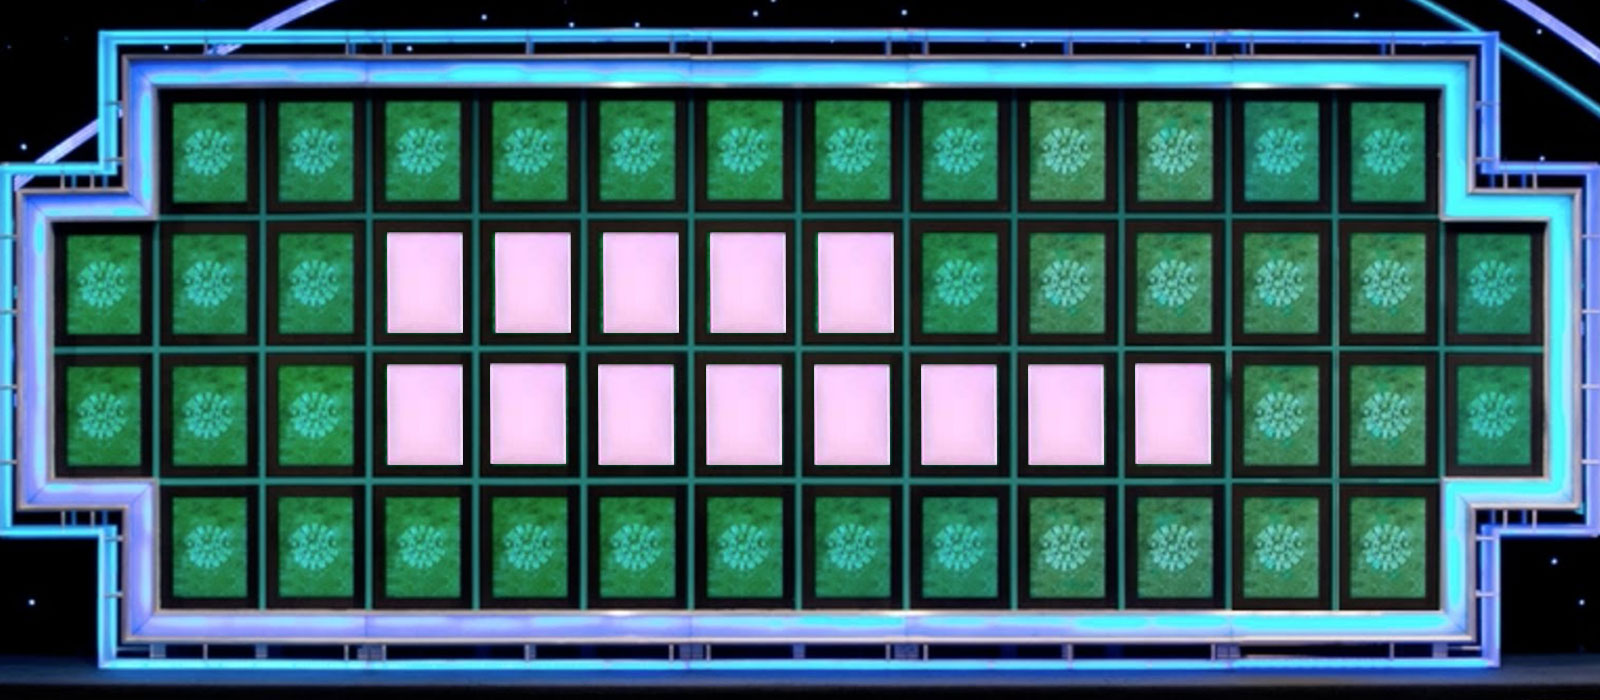 Can You Solve These Wheel of Fortune Puzzles? 815